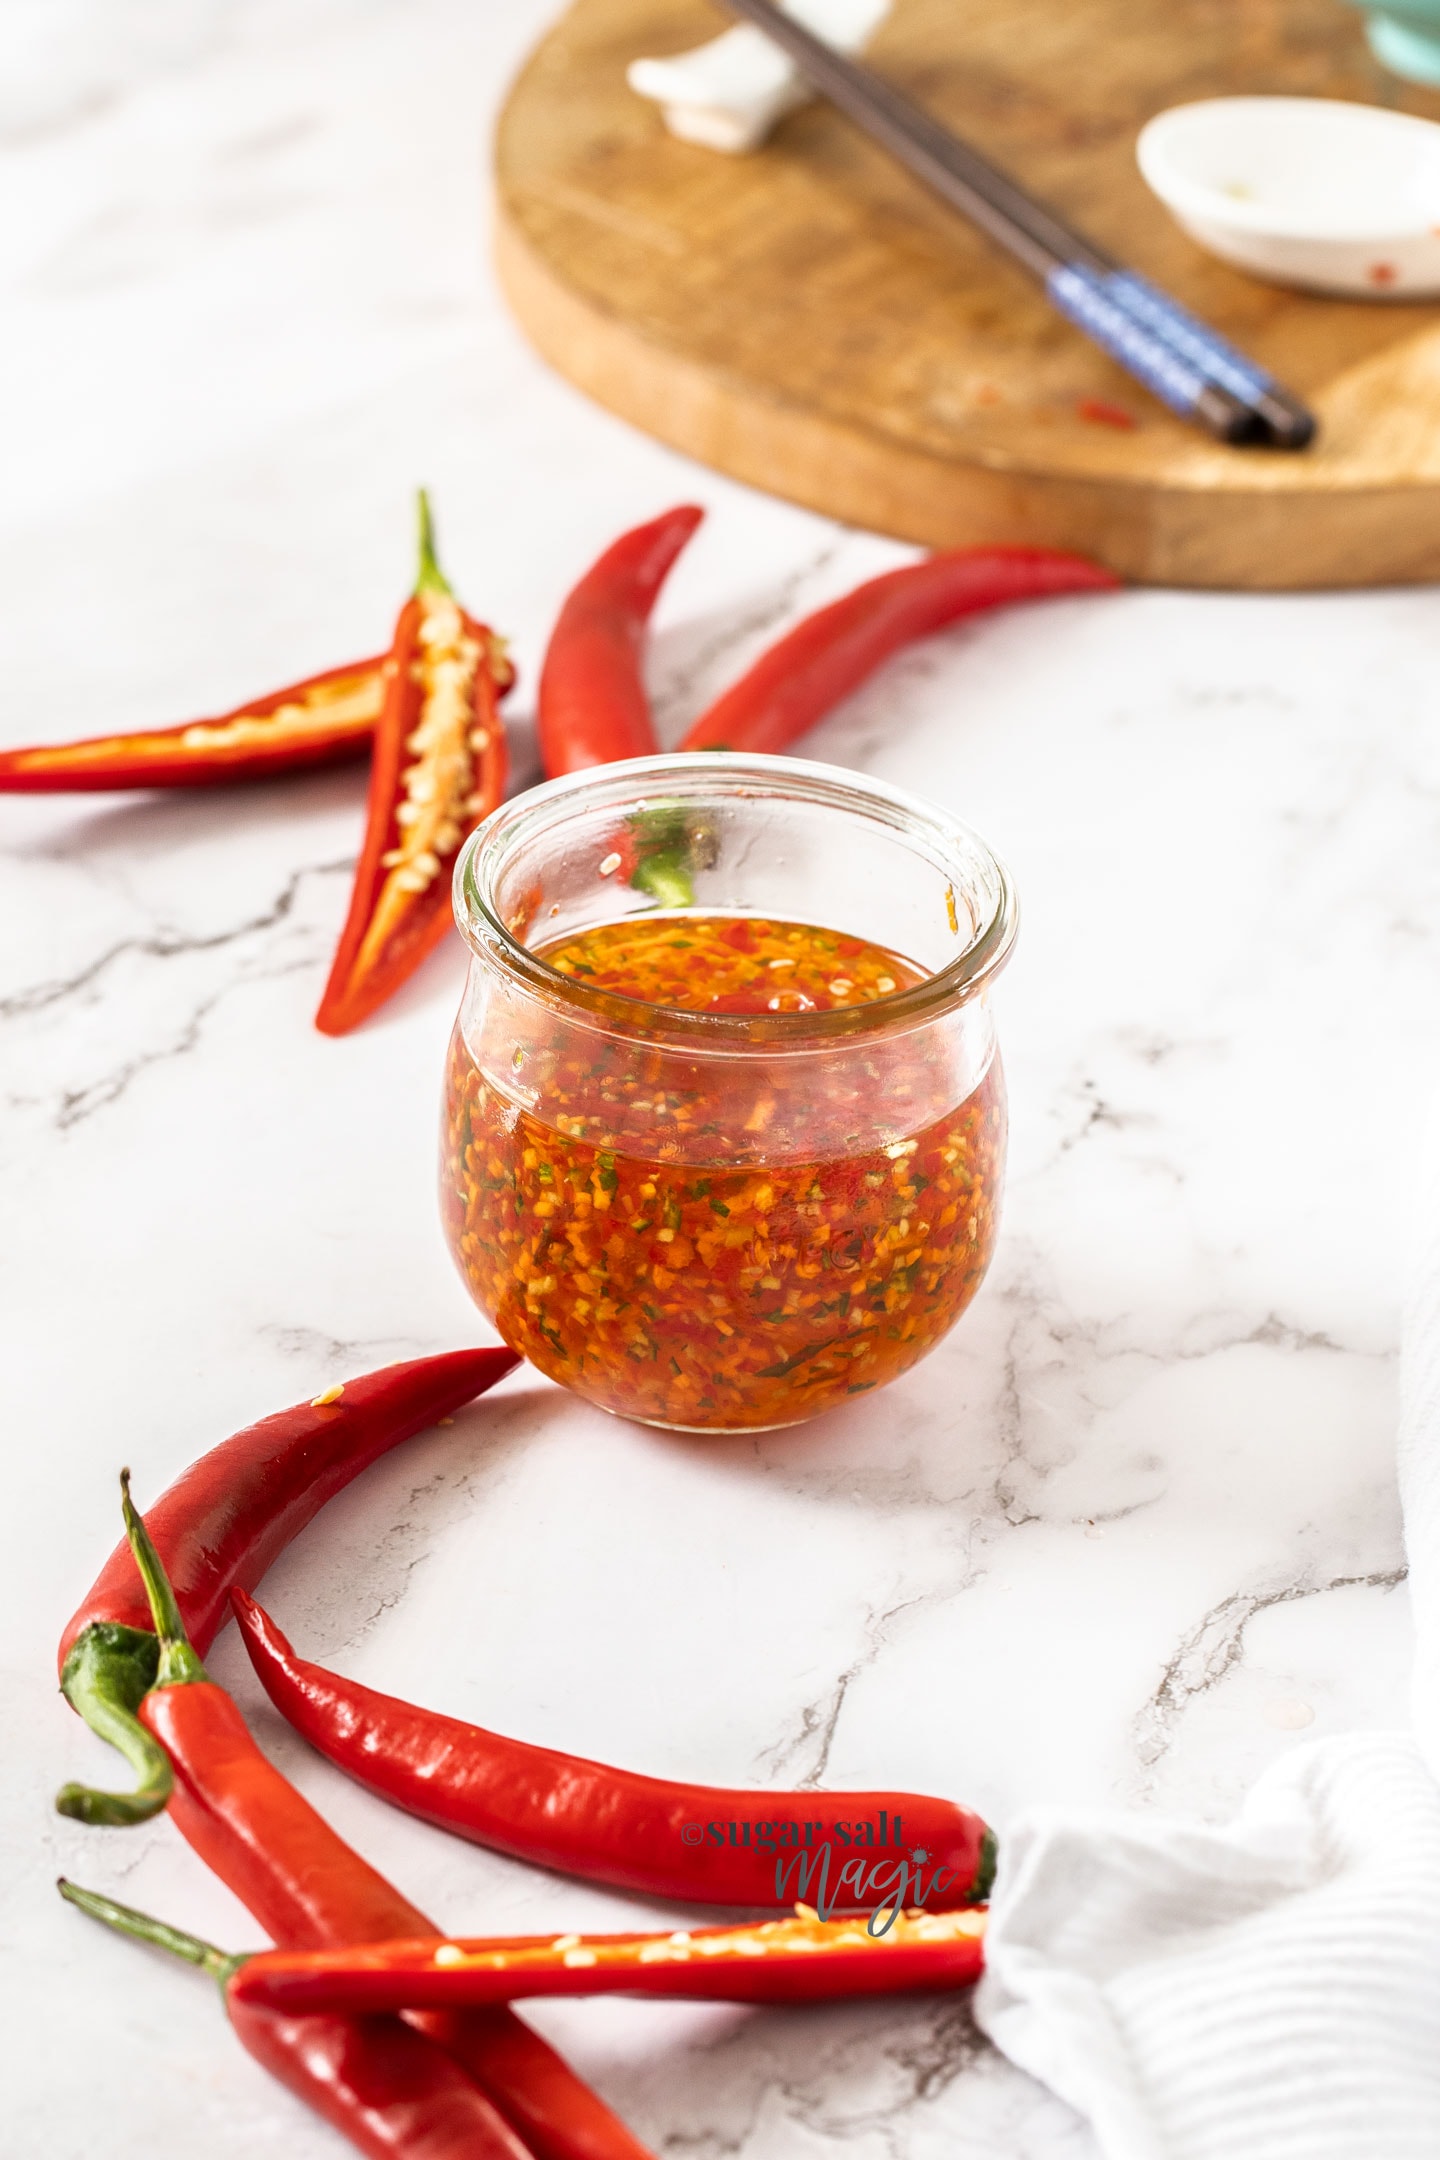 A glass jar filled with chilli sauce surrounded by chillis.